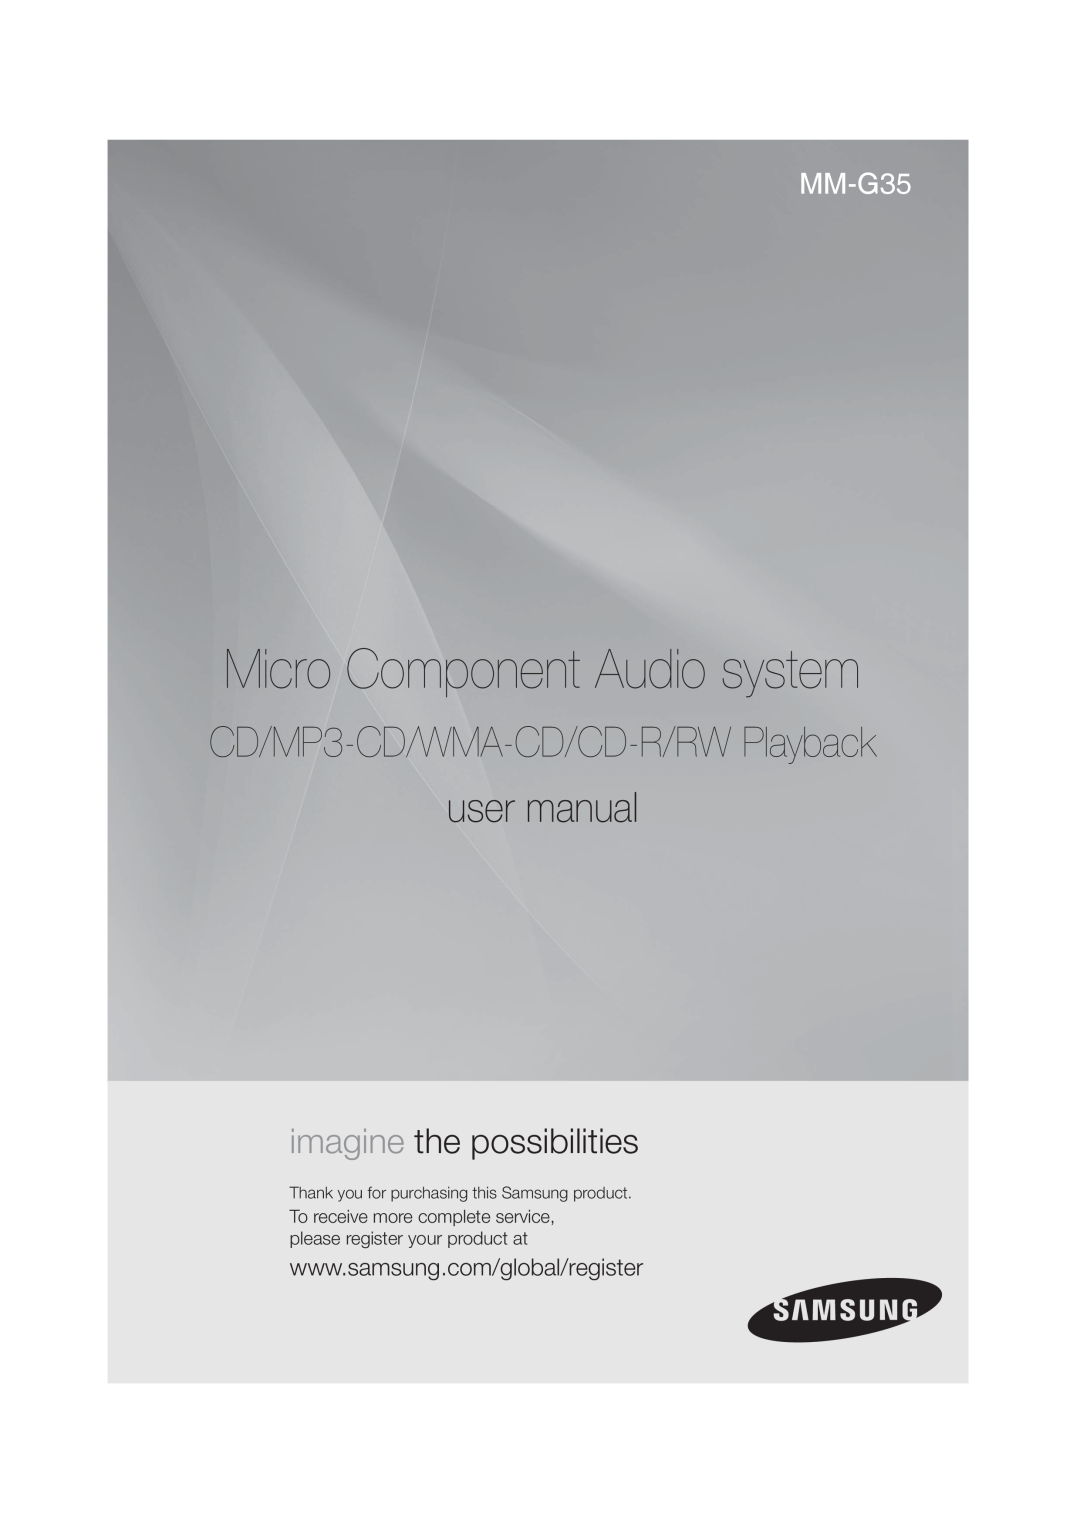 Samsung MM-G35 user manual Micro Component Audio system, CD/MP3-CD/WMA-CD/CD-R/RWPlayback, imagine the possibilities 